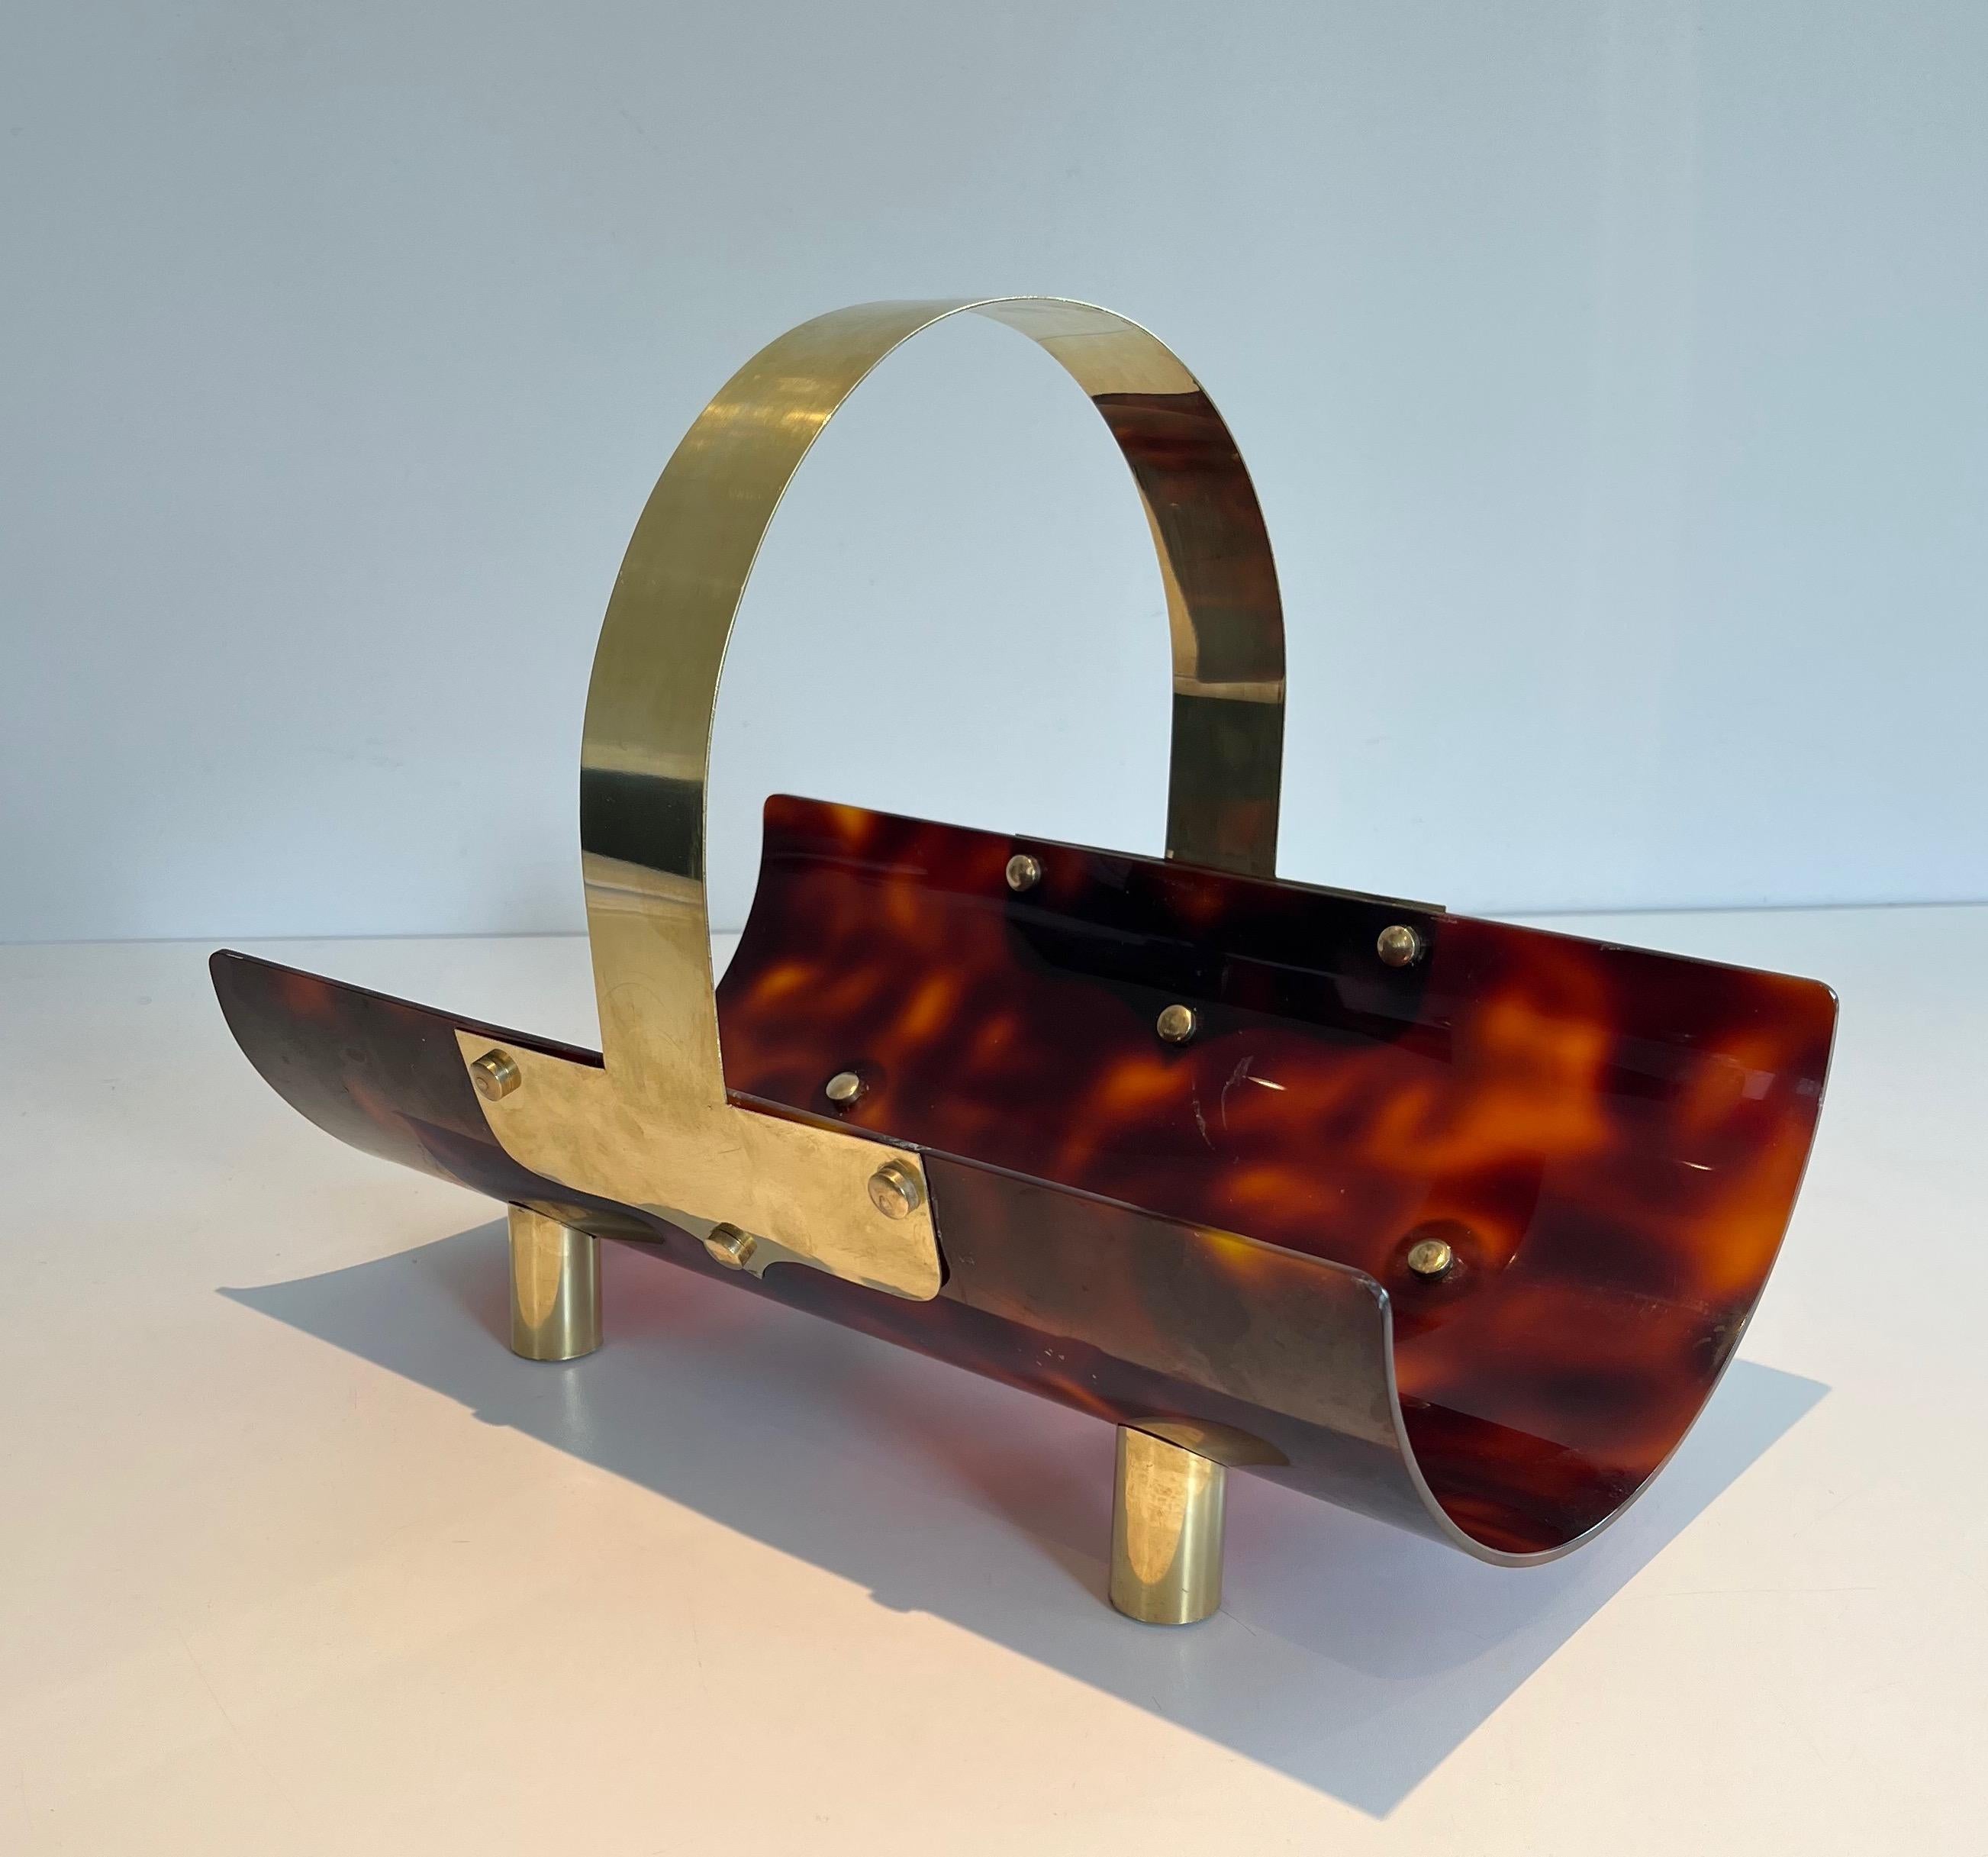 This very nice, rare and elegant logs holder is all made of brass and lucite imitating tortoise shell. This is a French work. Circa 1970